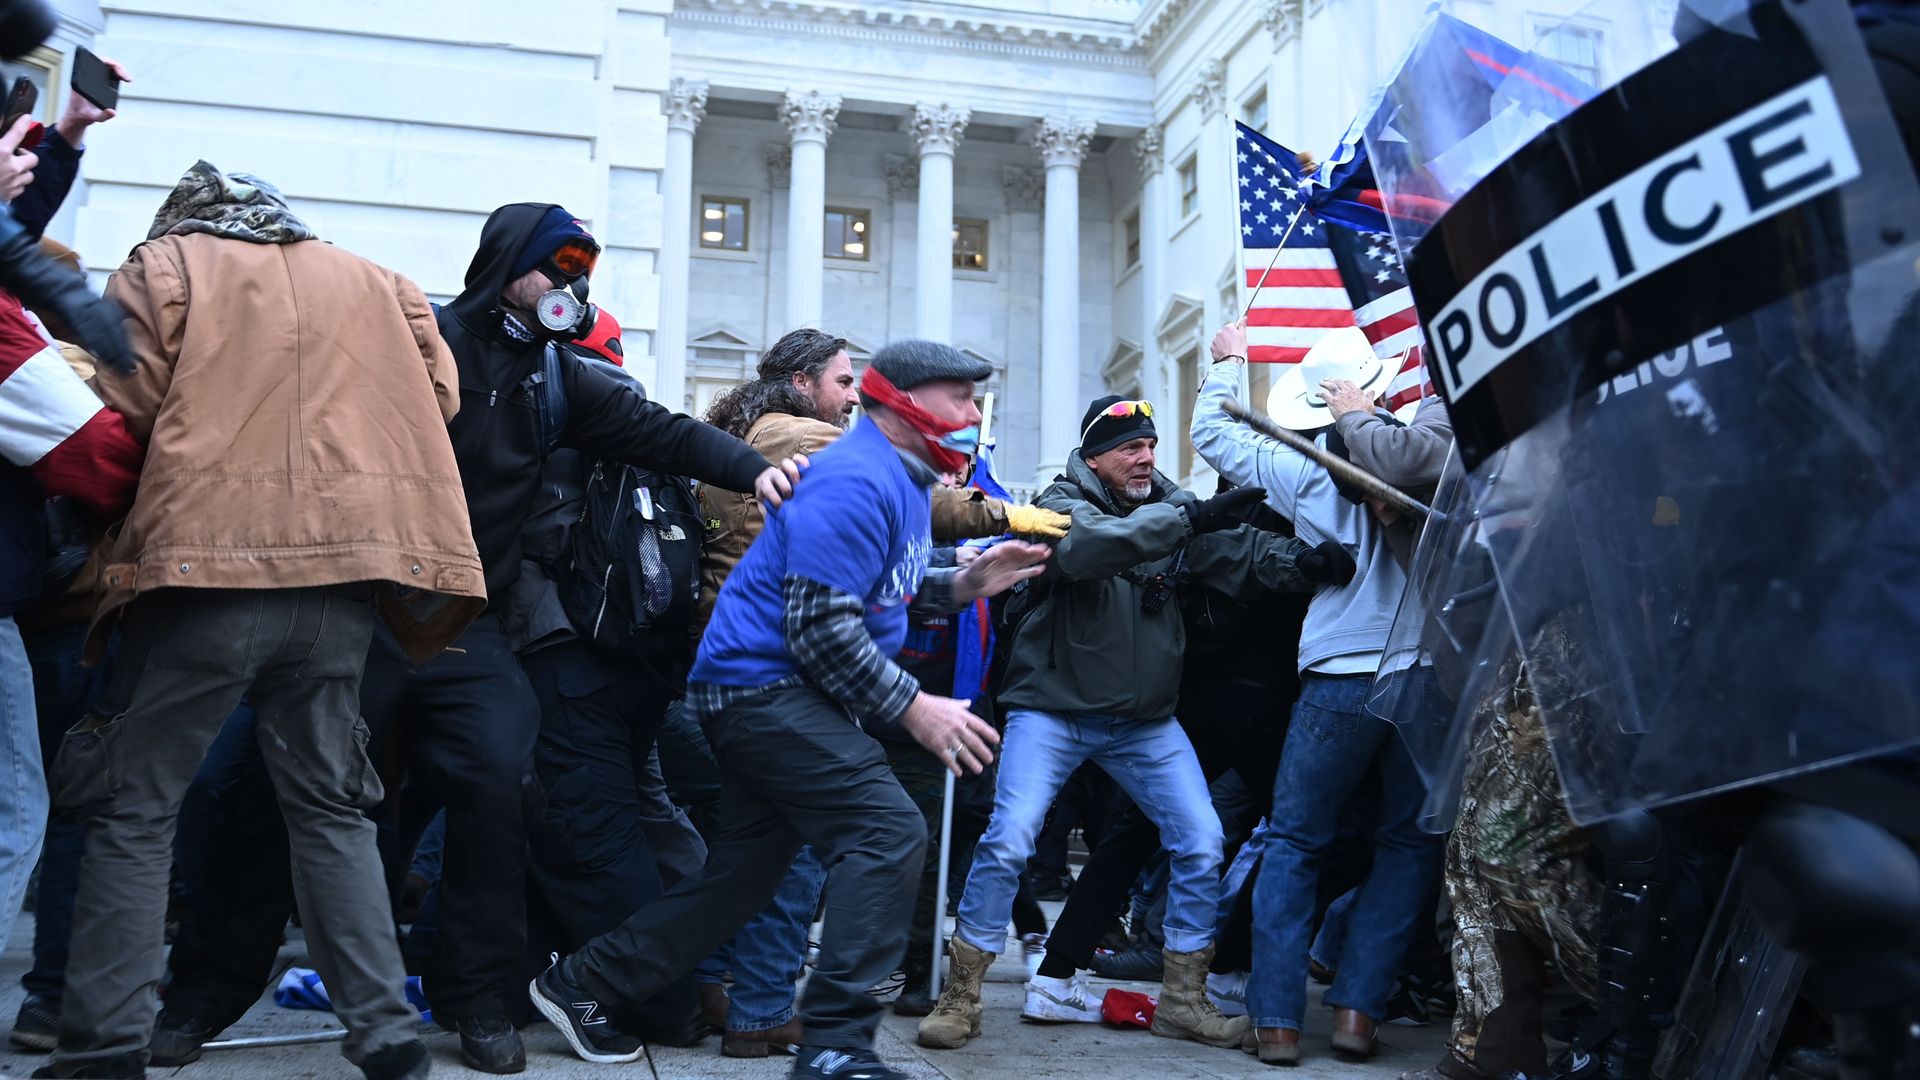 Trump supporters clash with police and security forces at the U.S. Capitol on Jan. 6, 2021.